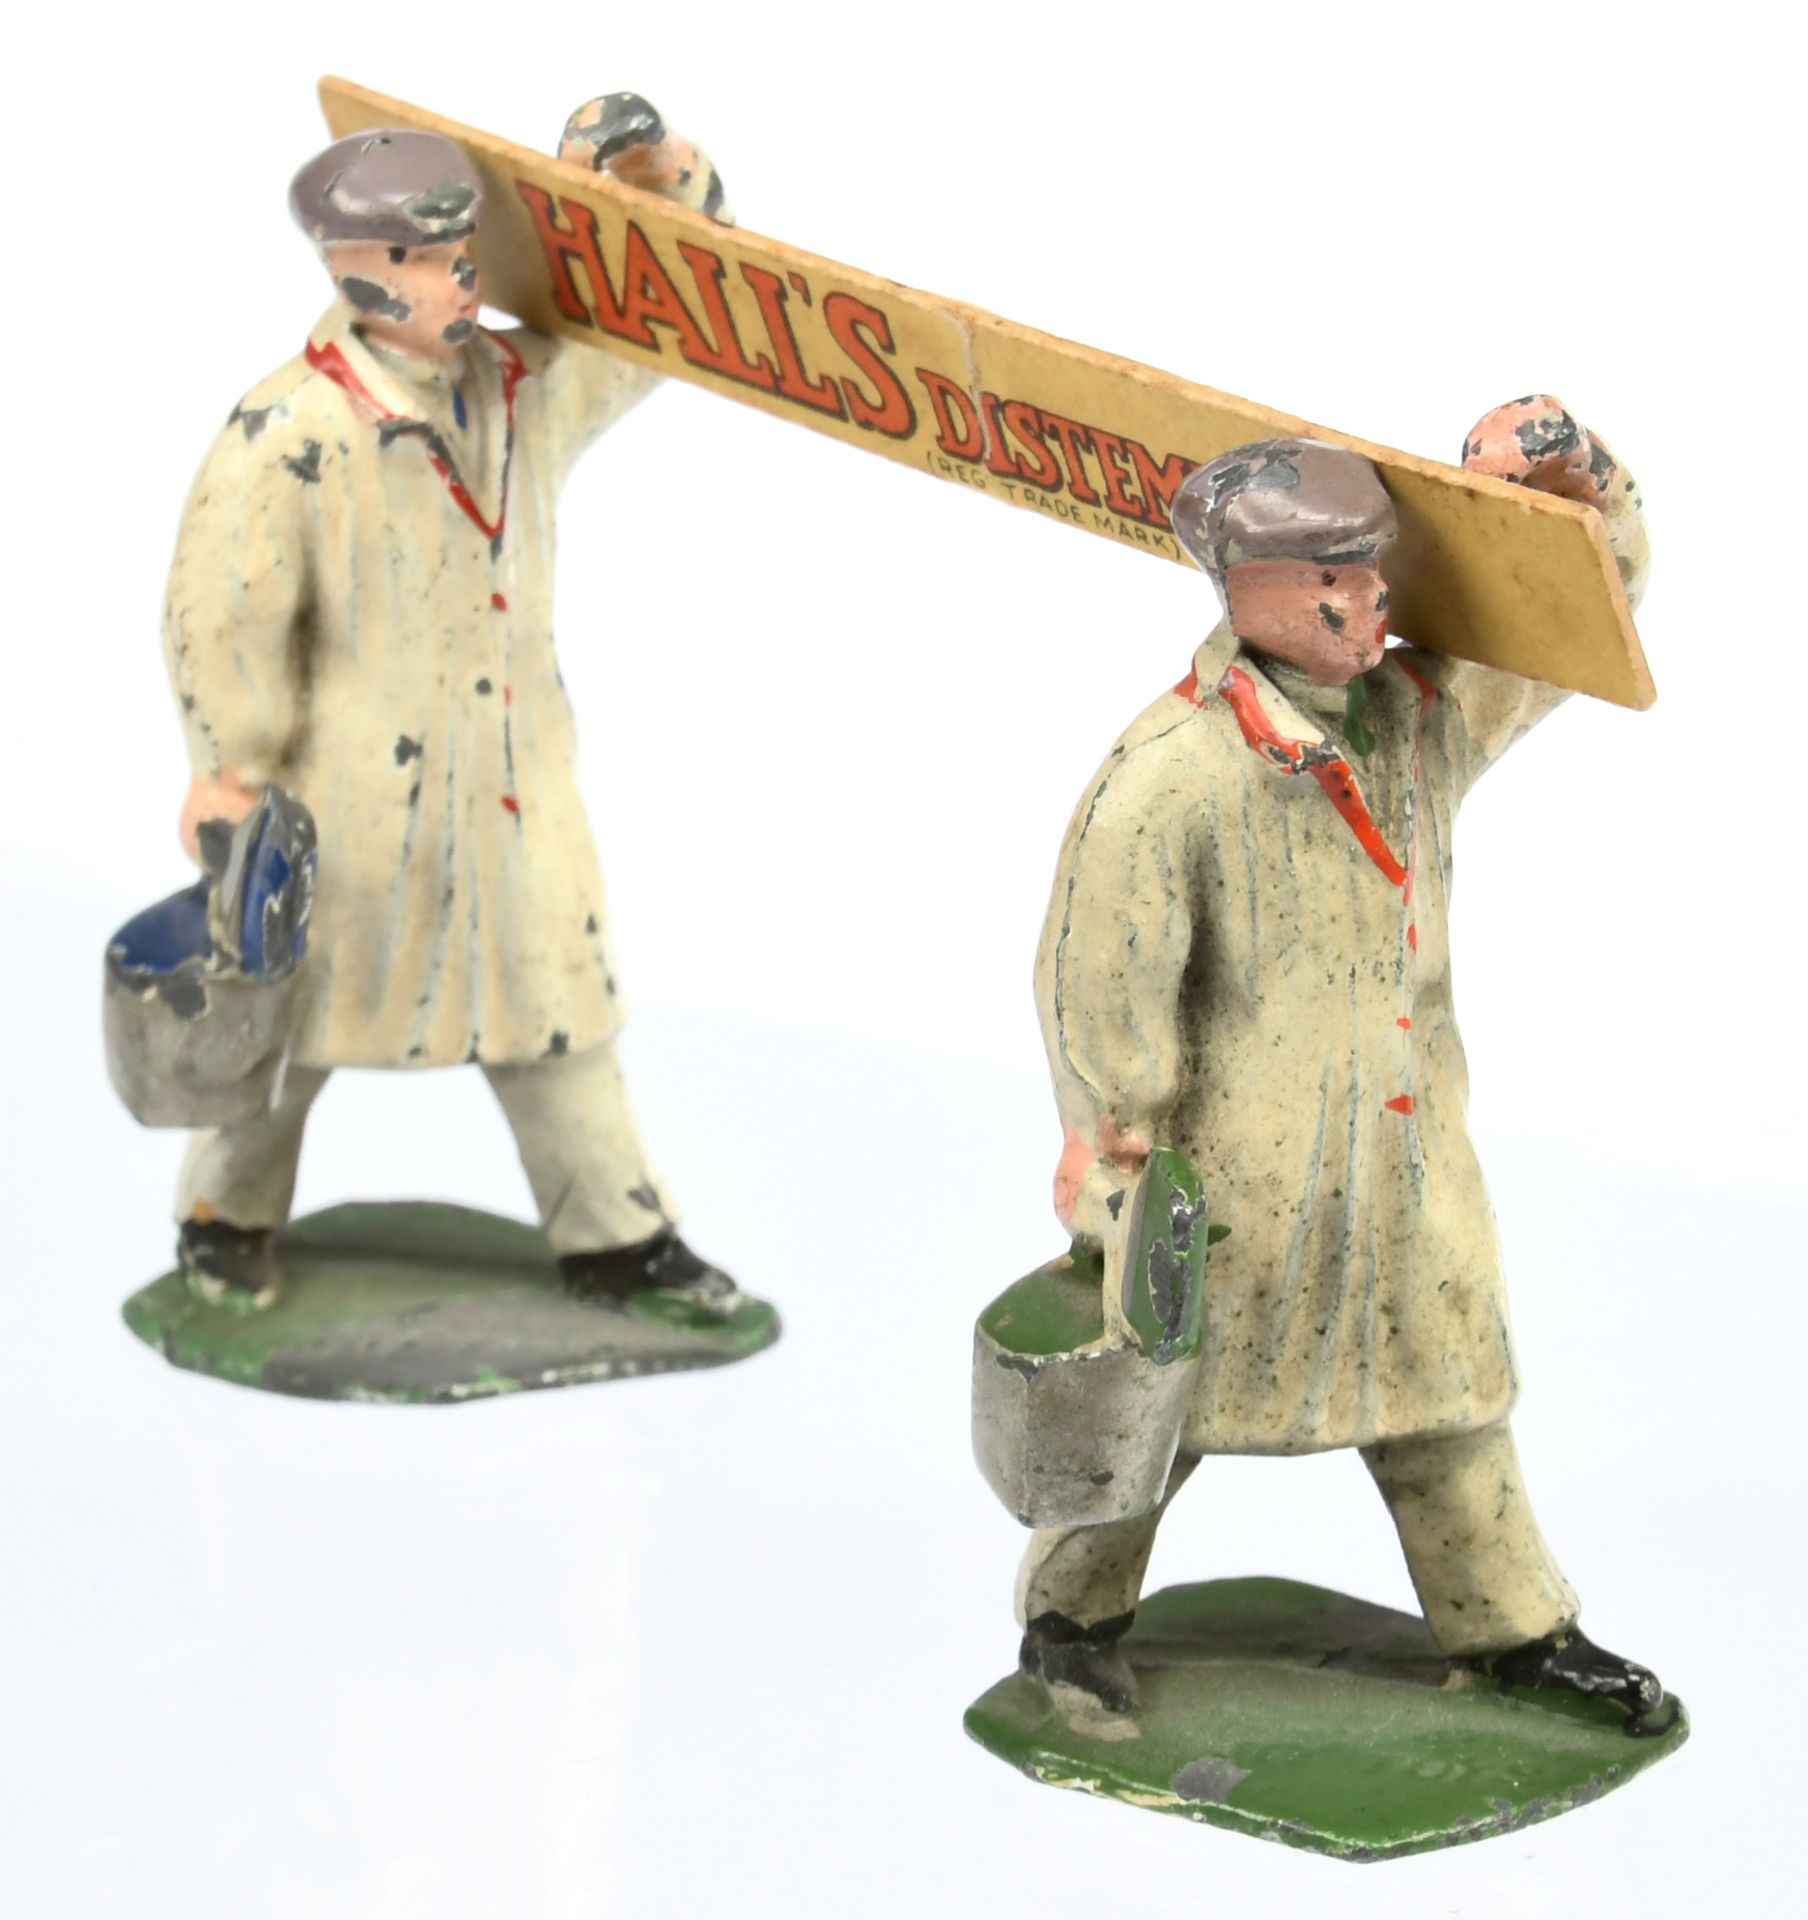 Dinky Pre-War 13 "Hall's Distemper" Figure Set - 2 X Figures with carded sign - See-Photo - Fair 